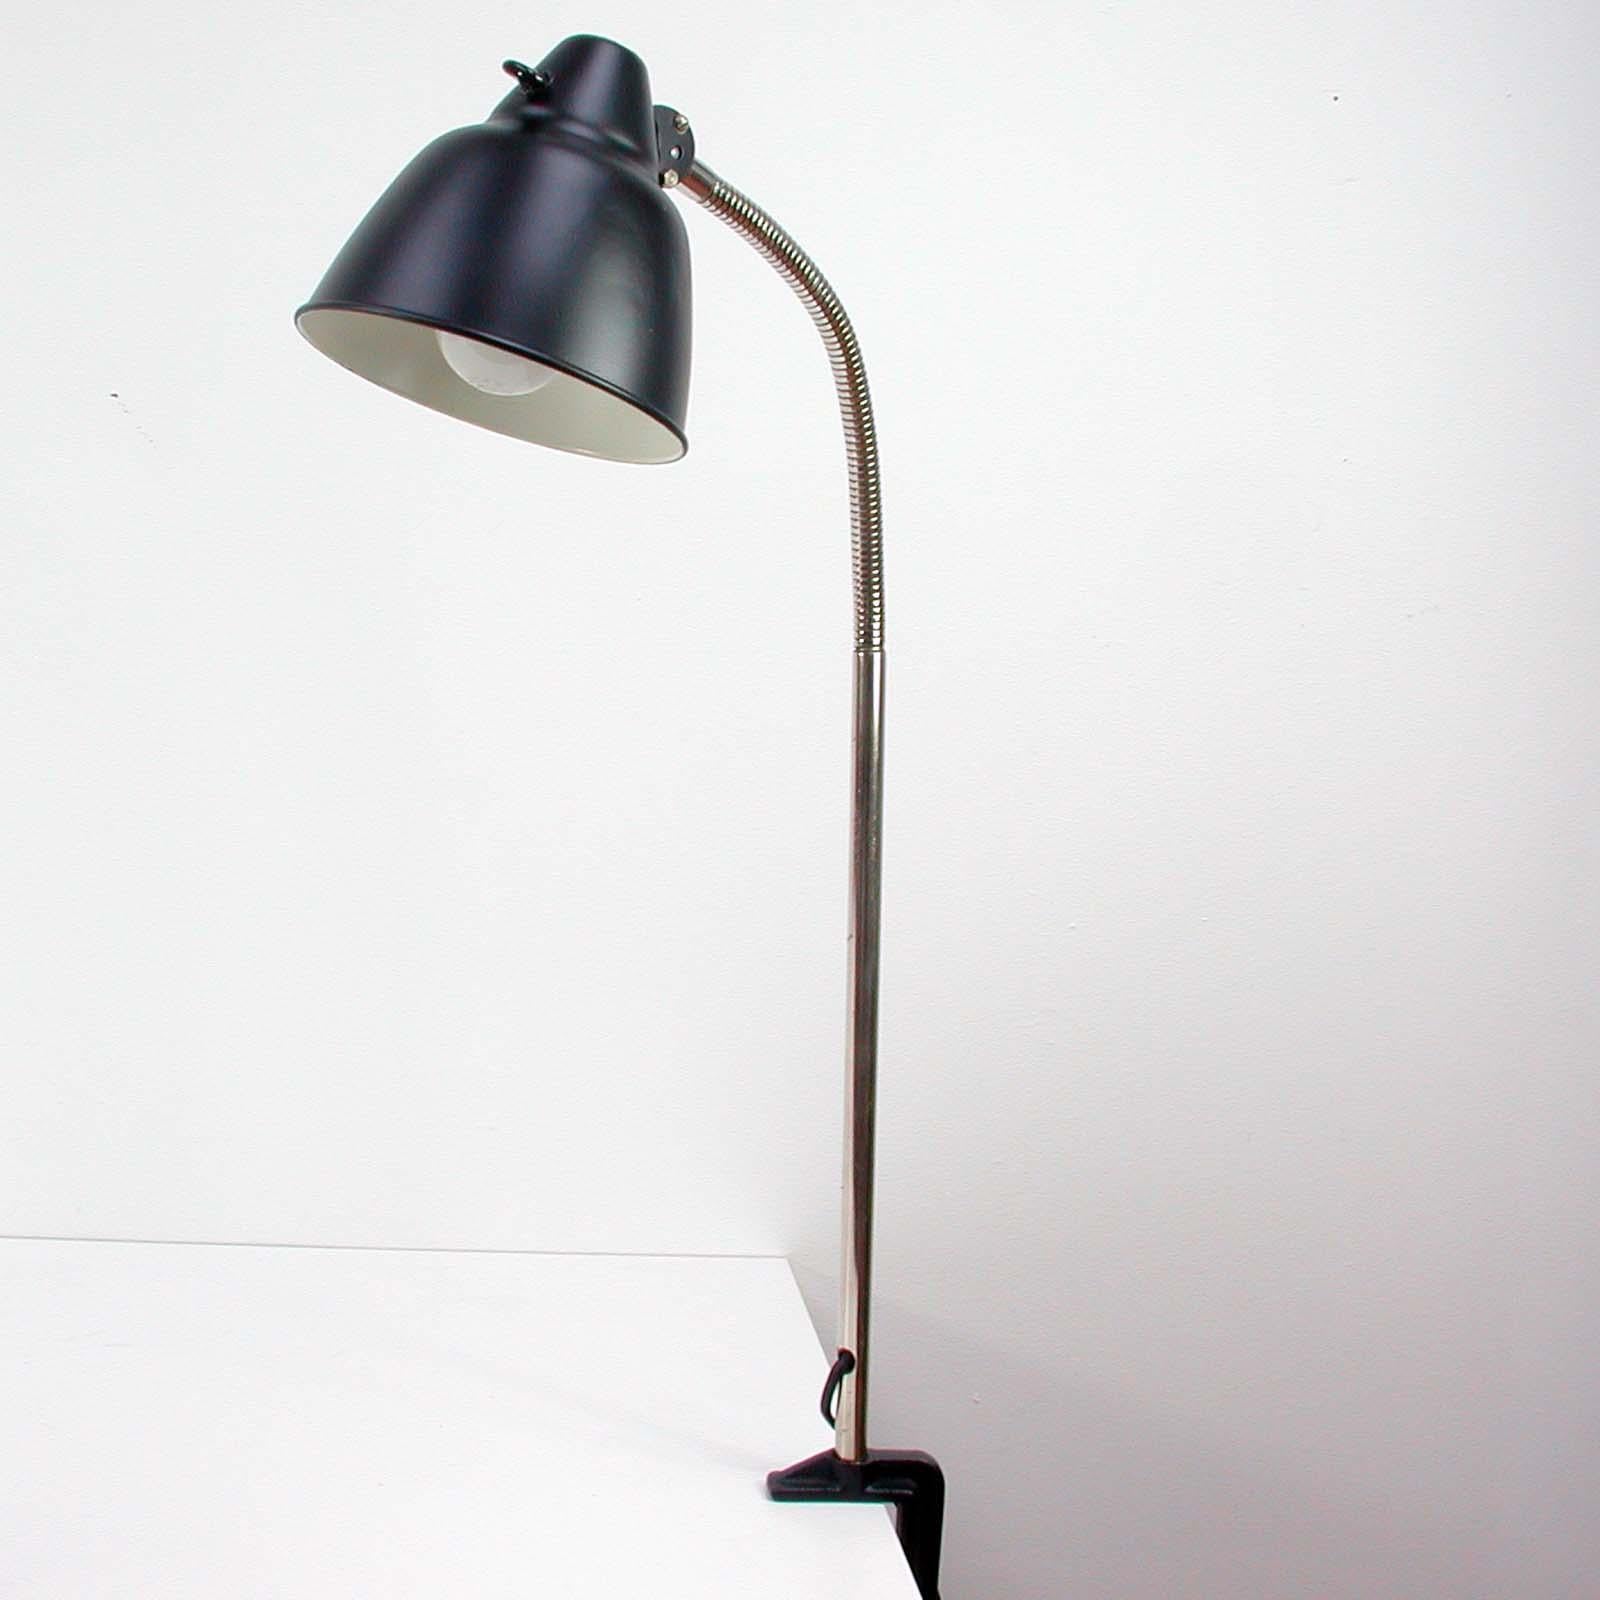 This vintage desk light was designed and manufactured by HELO in Neuburg in the 1950s.

The lamp features an aluminum lampshade and a flexible, chrome-plated gooseneck lamp arm. The bakelite on/off switch is located on the lampshade. The base of the